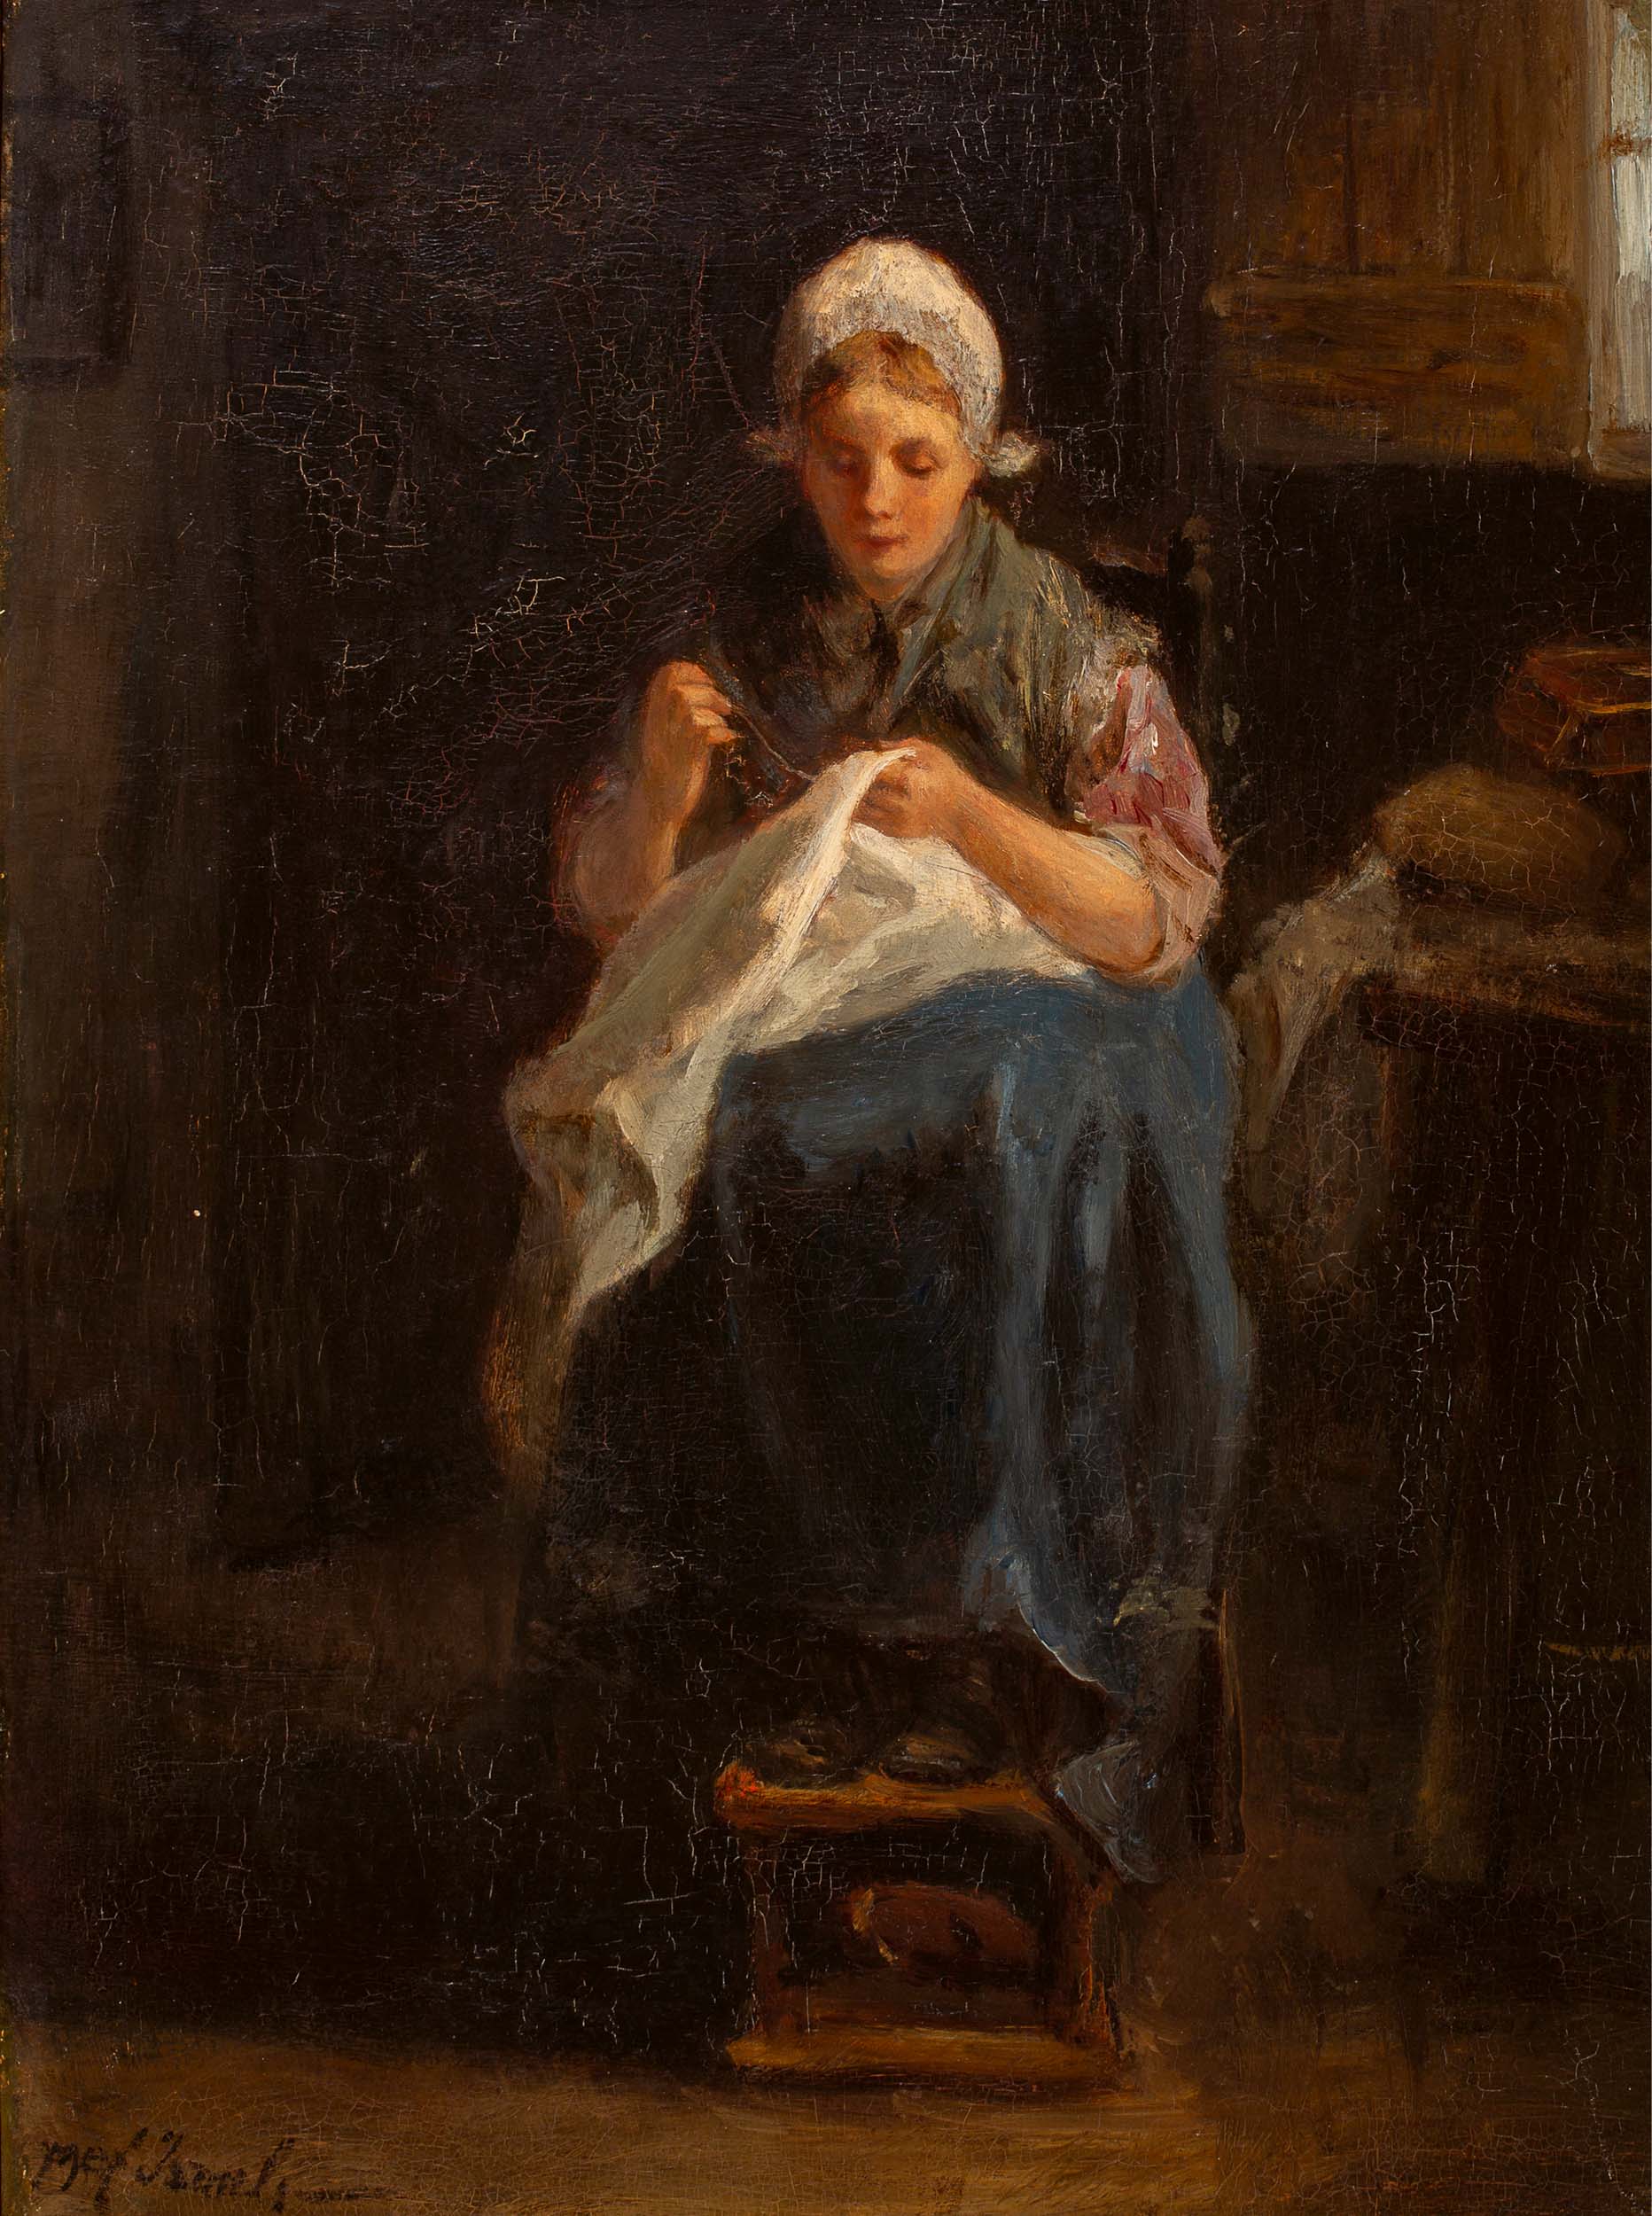 A peasant girl sewing